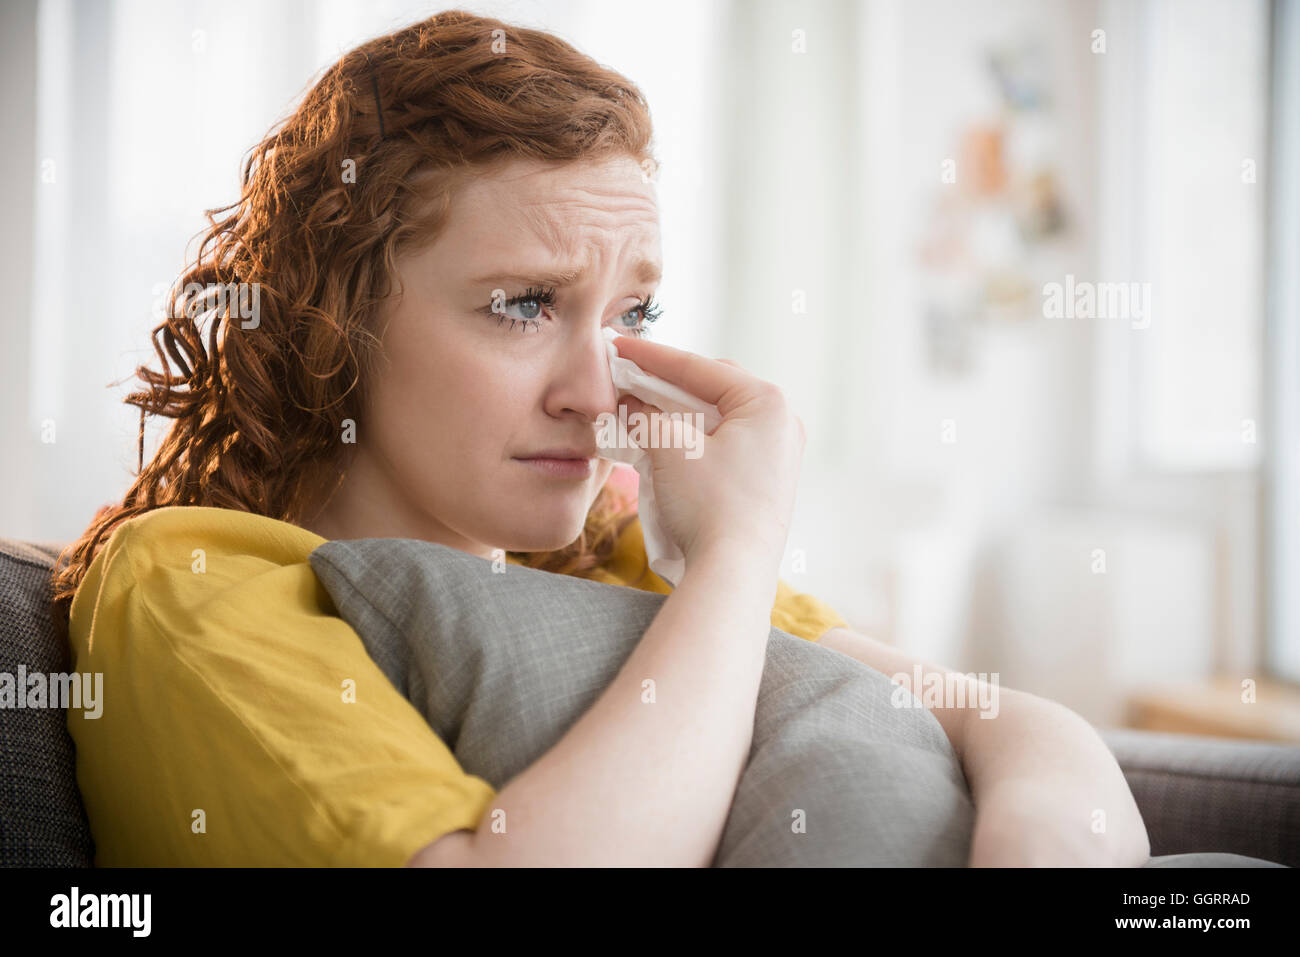 Crying Caucasian woman clutching pillow wiping tears Stock Photo